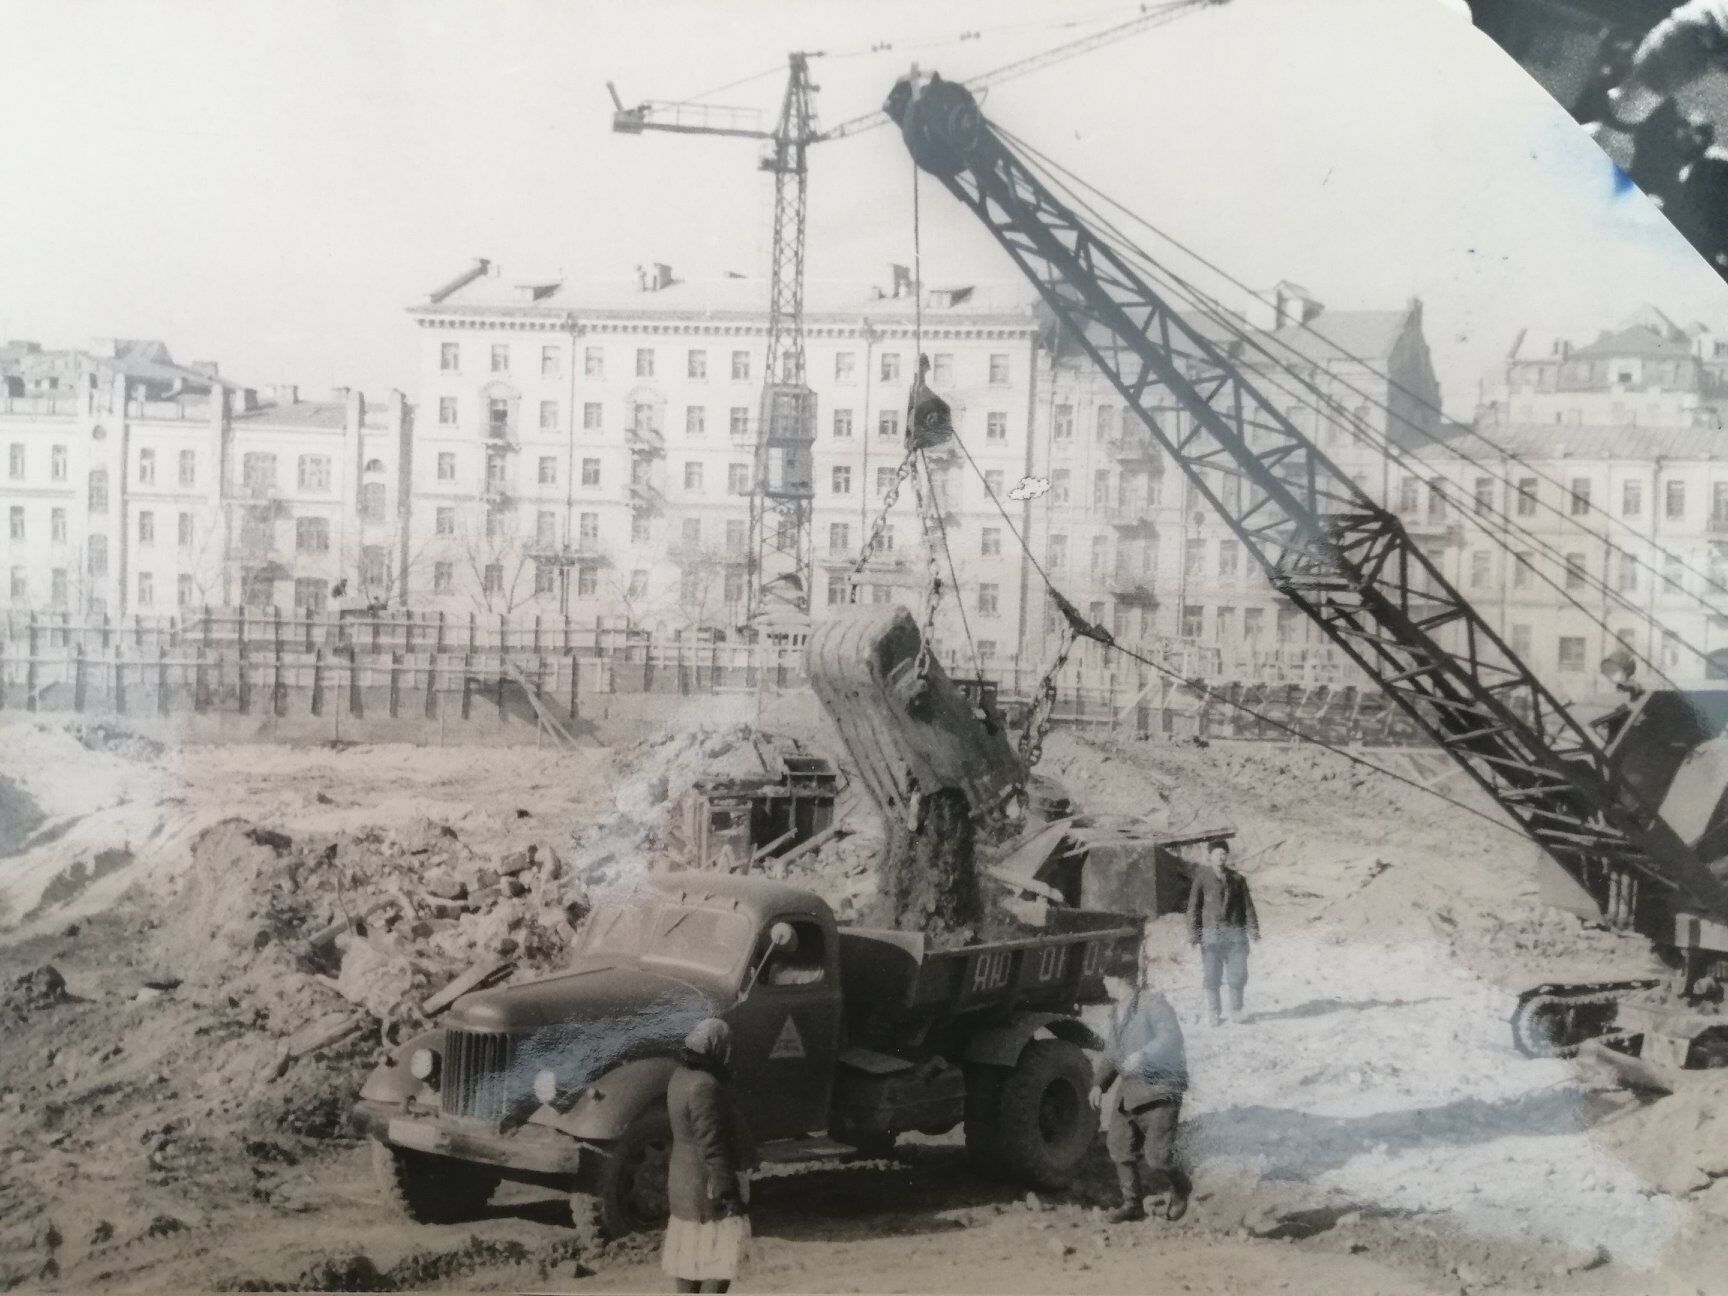 In the network, they showed how the Kyiv Sports Palace was built in the late 1950. Unique photos